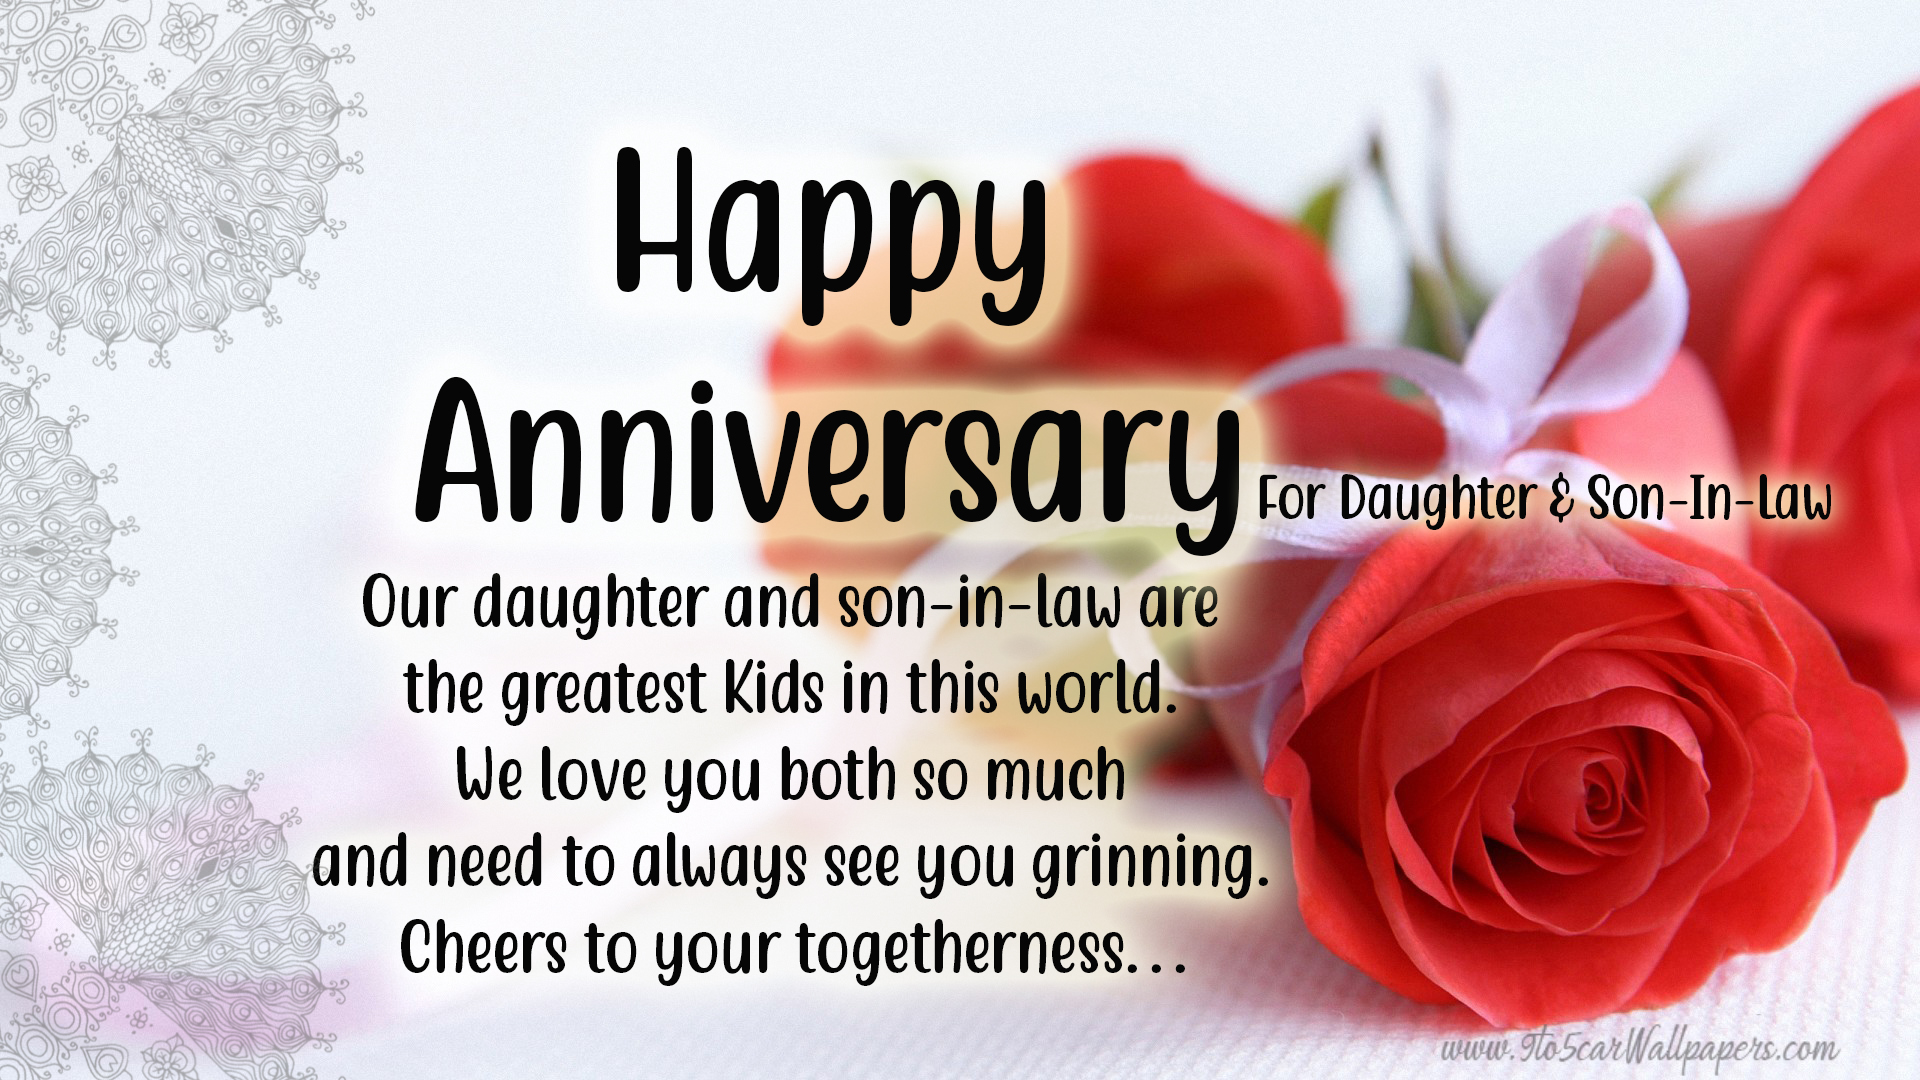 daughter-son-in-law-anniversary-wishes-9to5-car-wallpapers